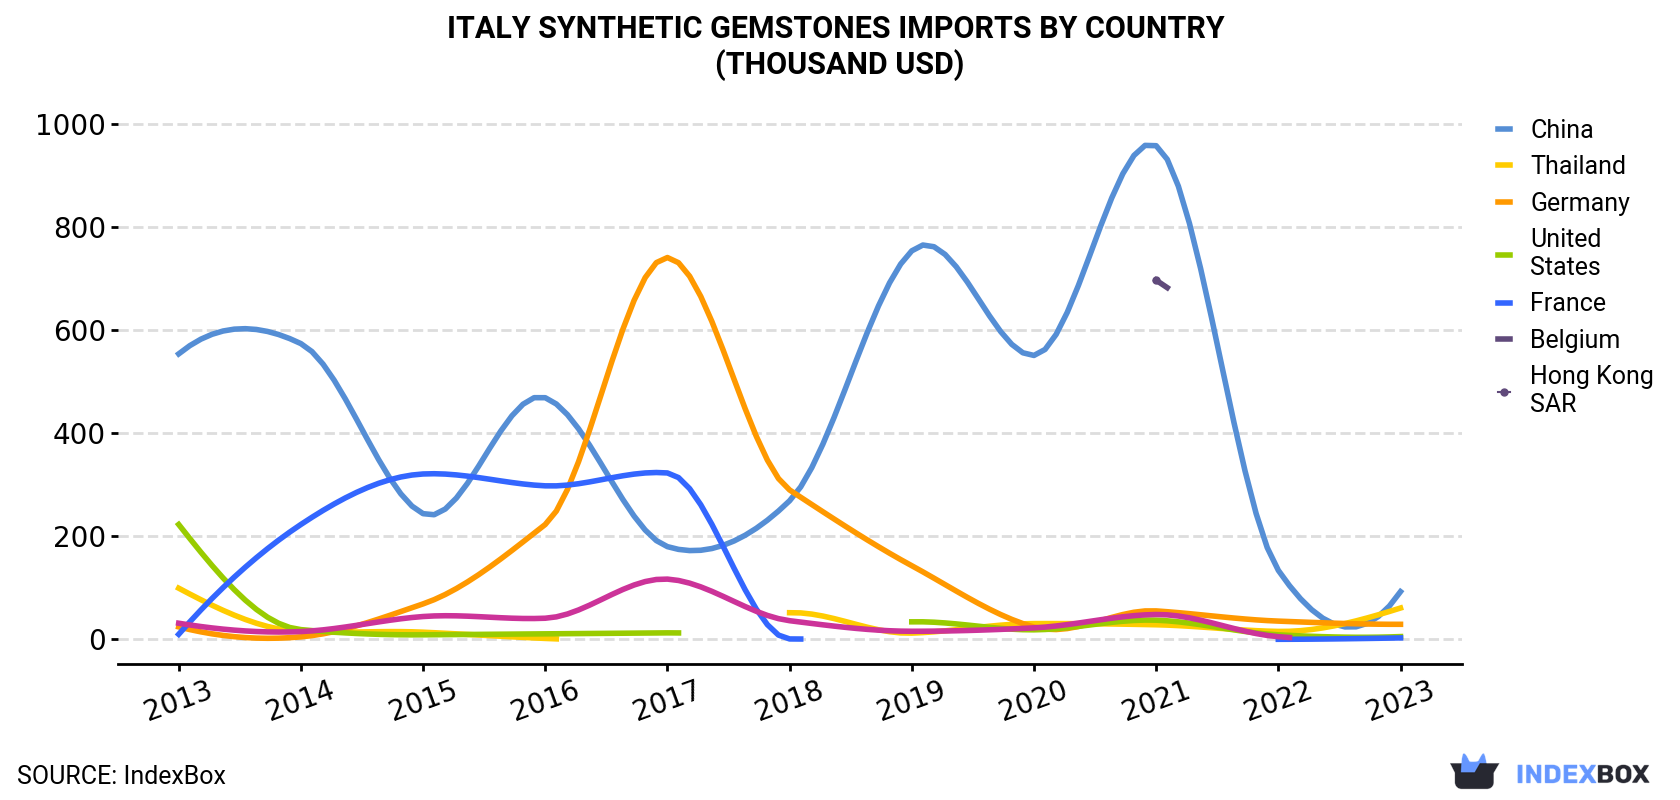 Italy Synthetic Gemstones Imports By Country (Thousand USD)